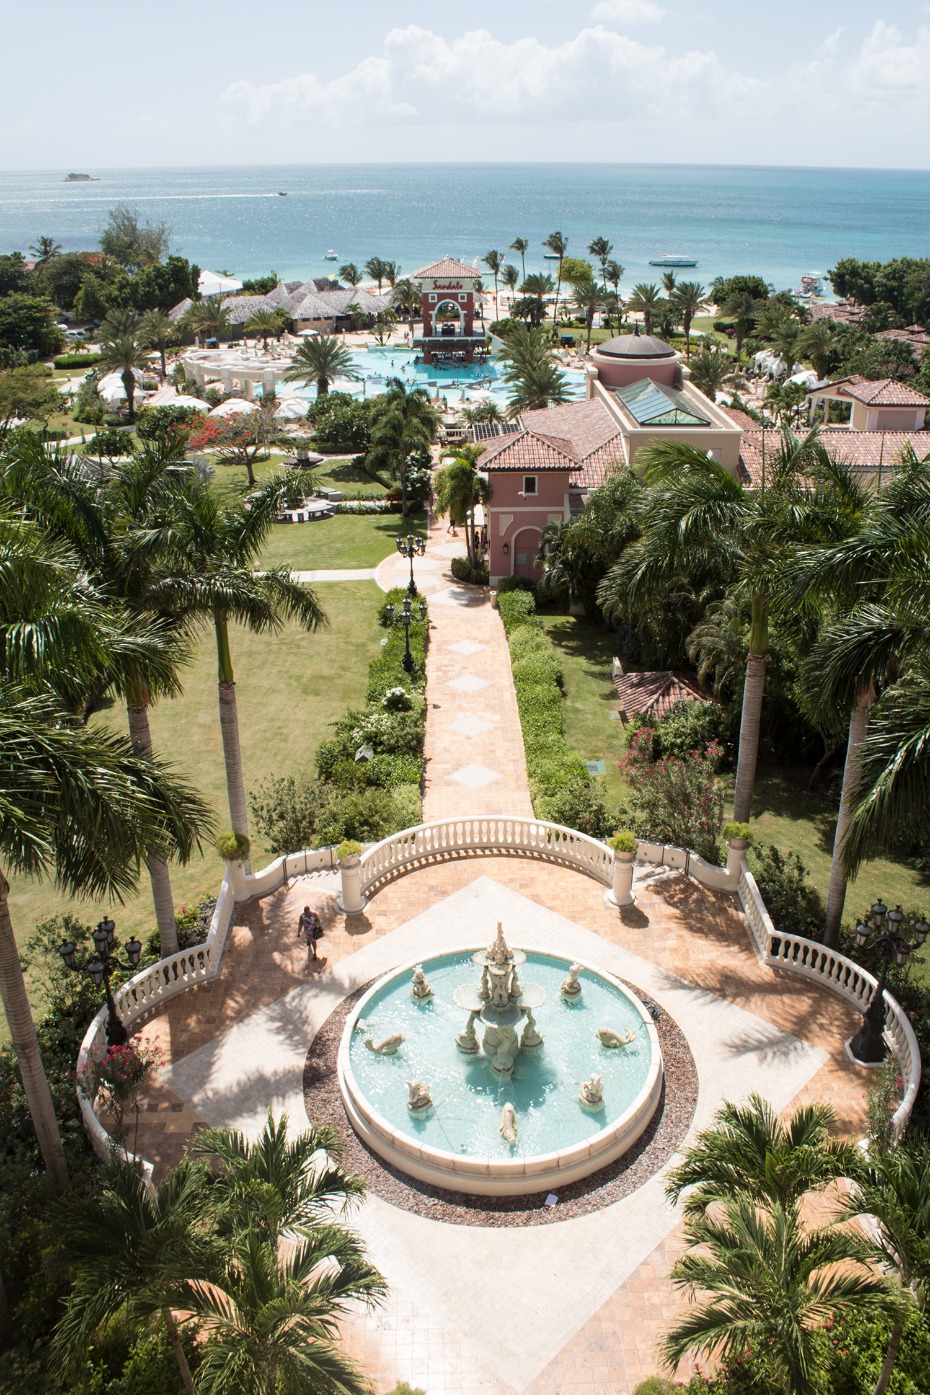 Get married at the Sandals Grande Antigua in the Caribbean